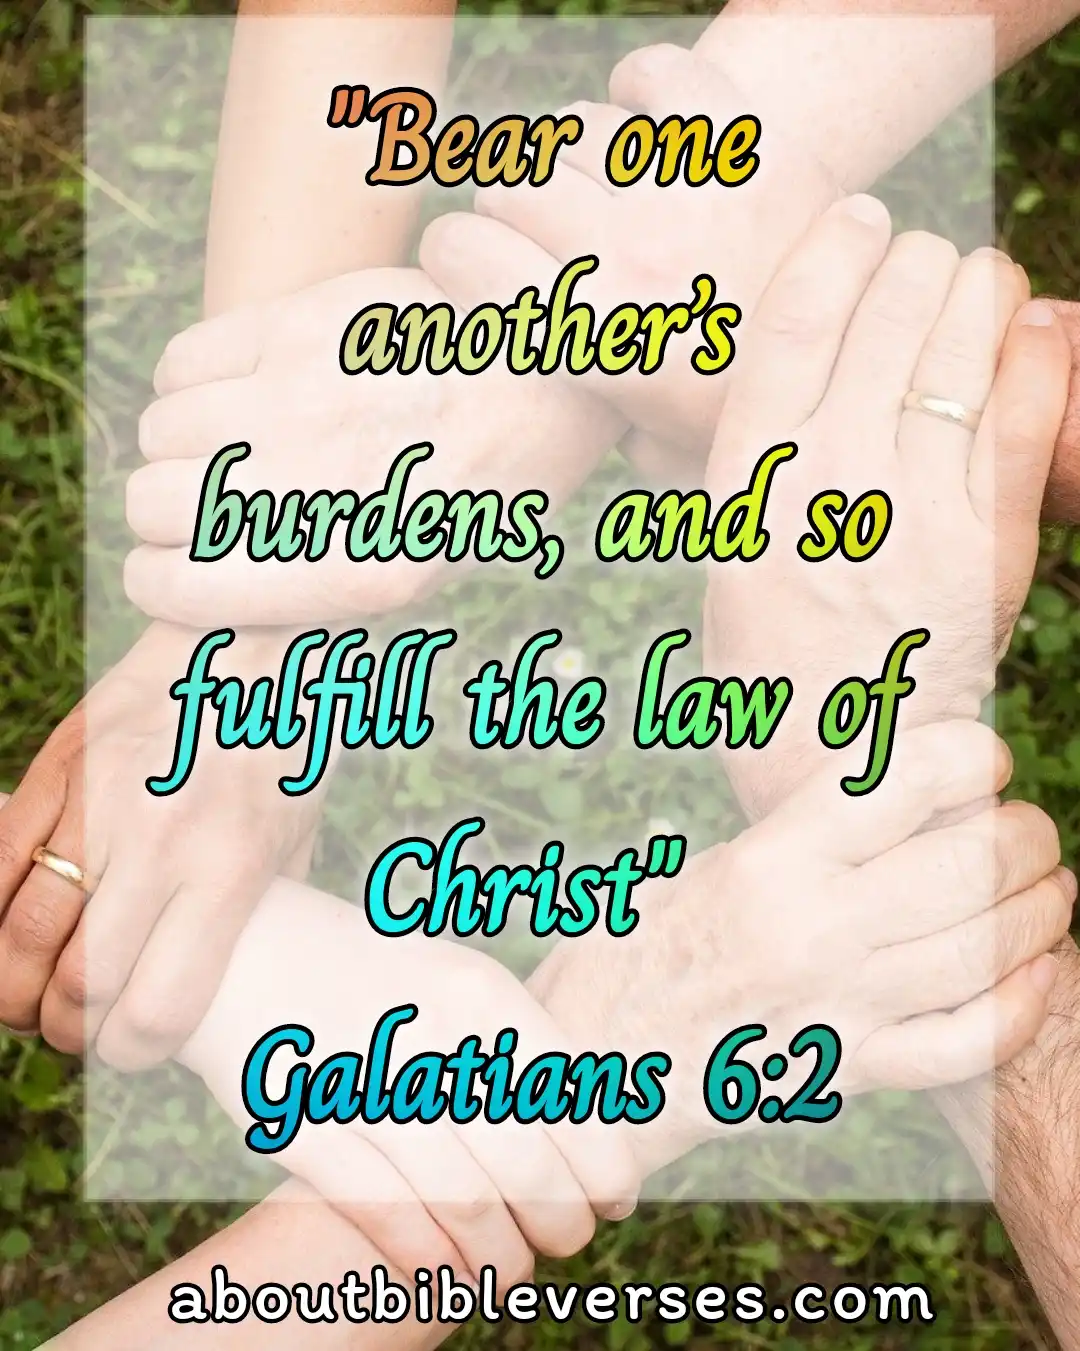 Bible Verses About Serving Others (Galatians 6:2)